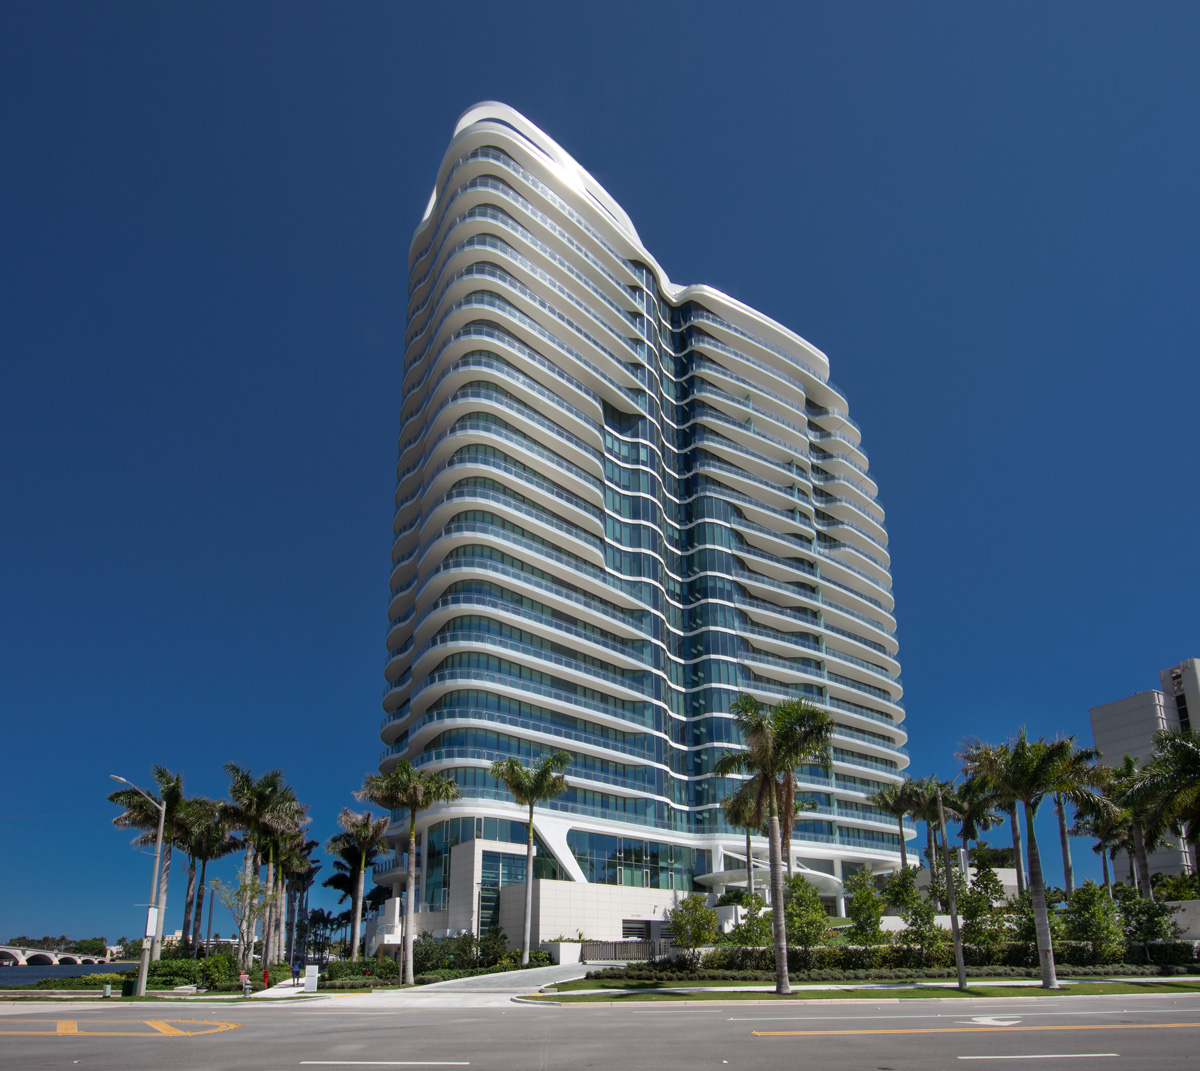 Architectural view of the Bristol luxury rental condominium located at the edge of the intercostal.